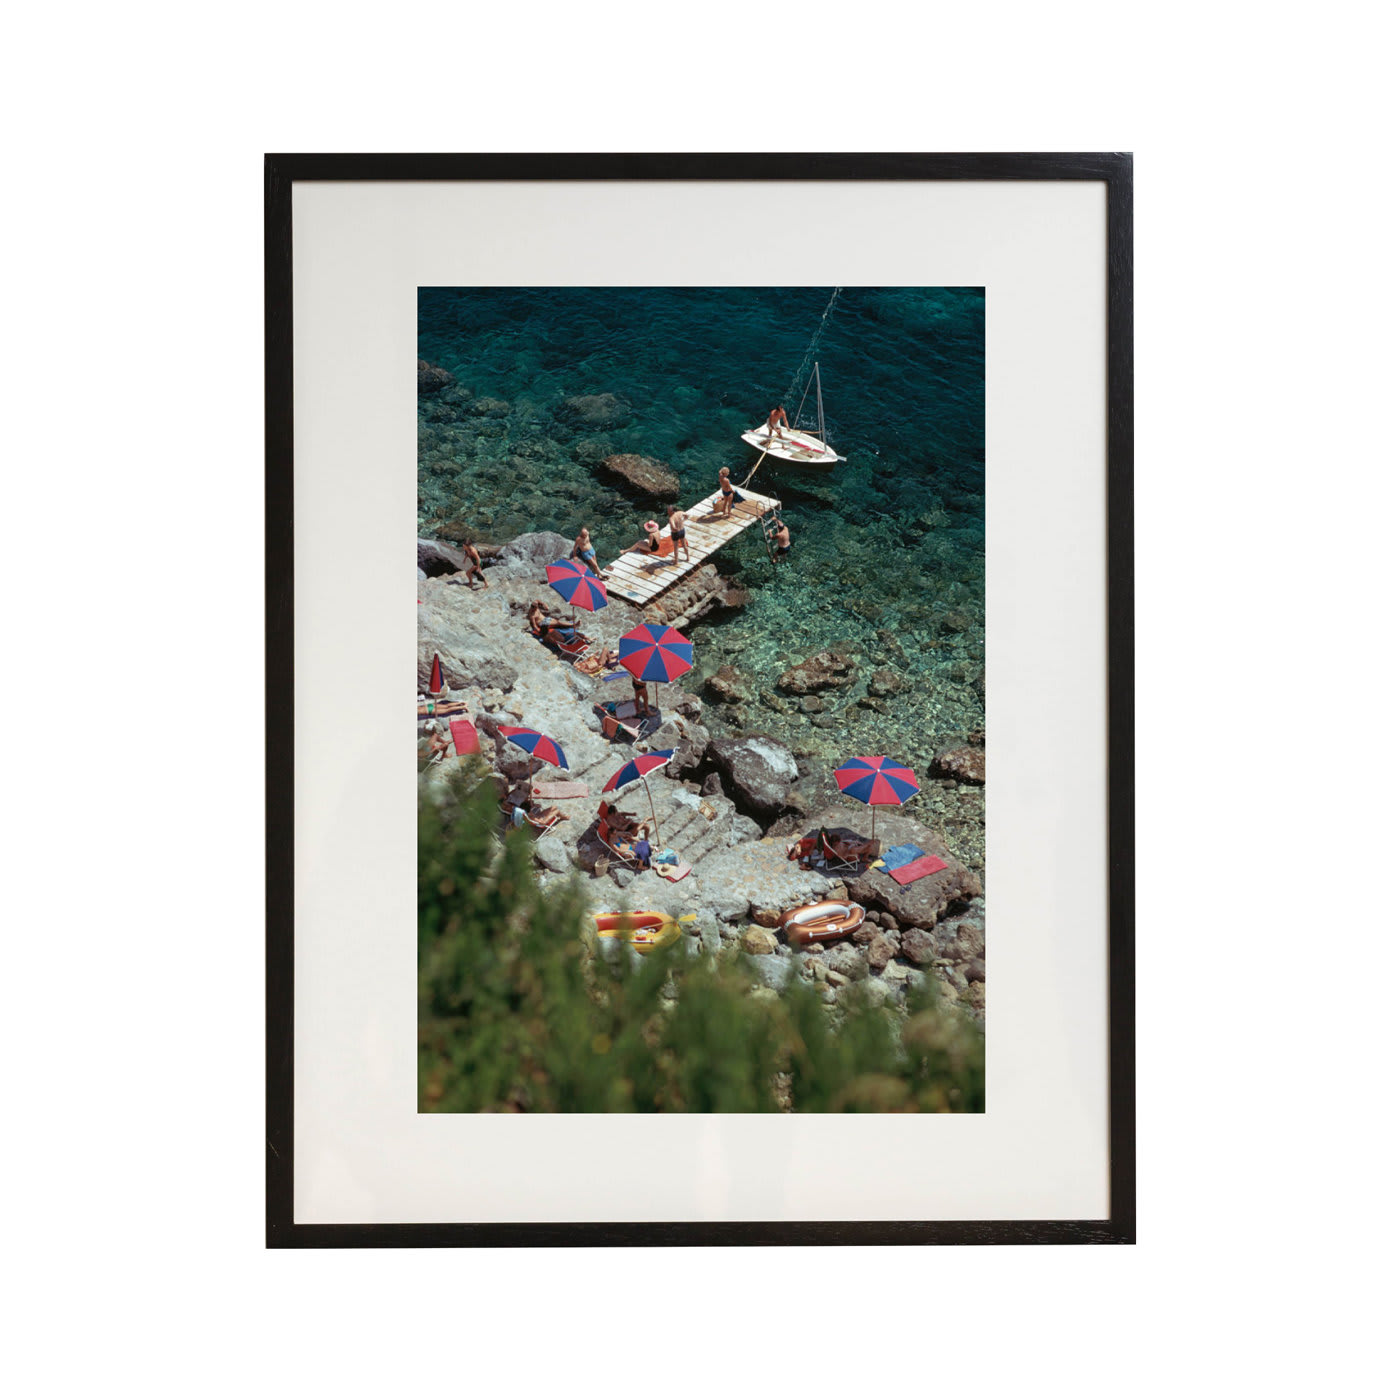 Porto Ercole Framed Print by Slim Aarons - Getty Images